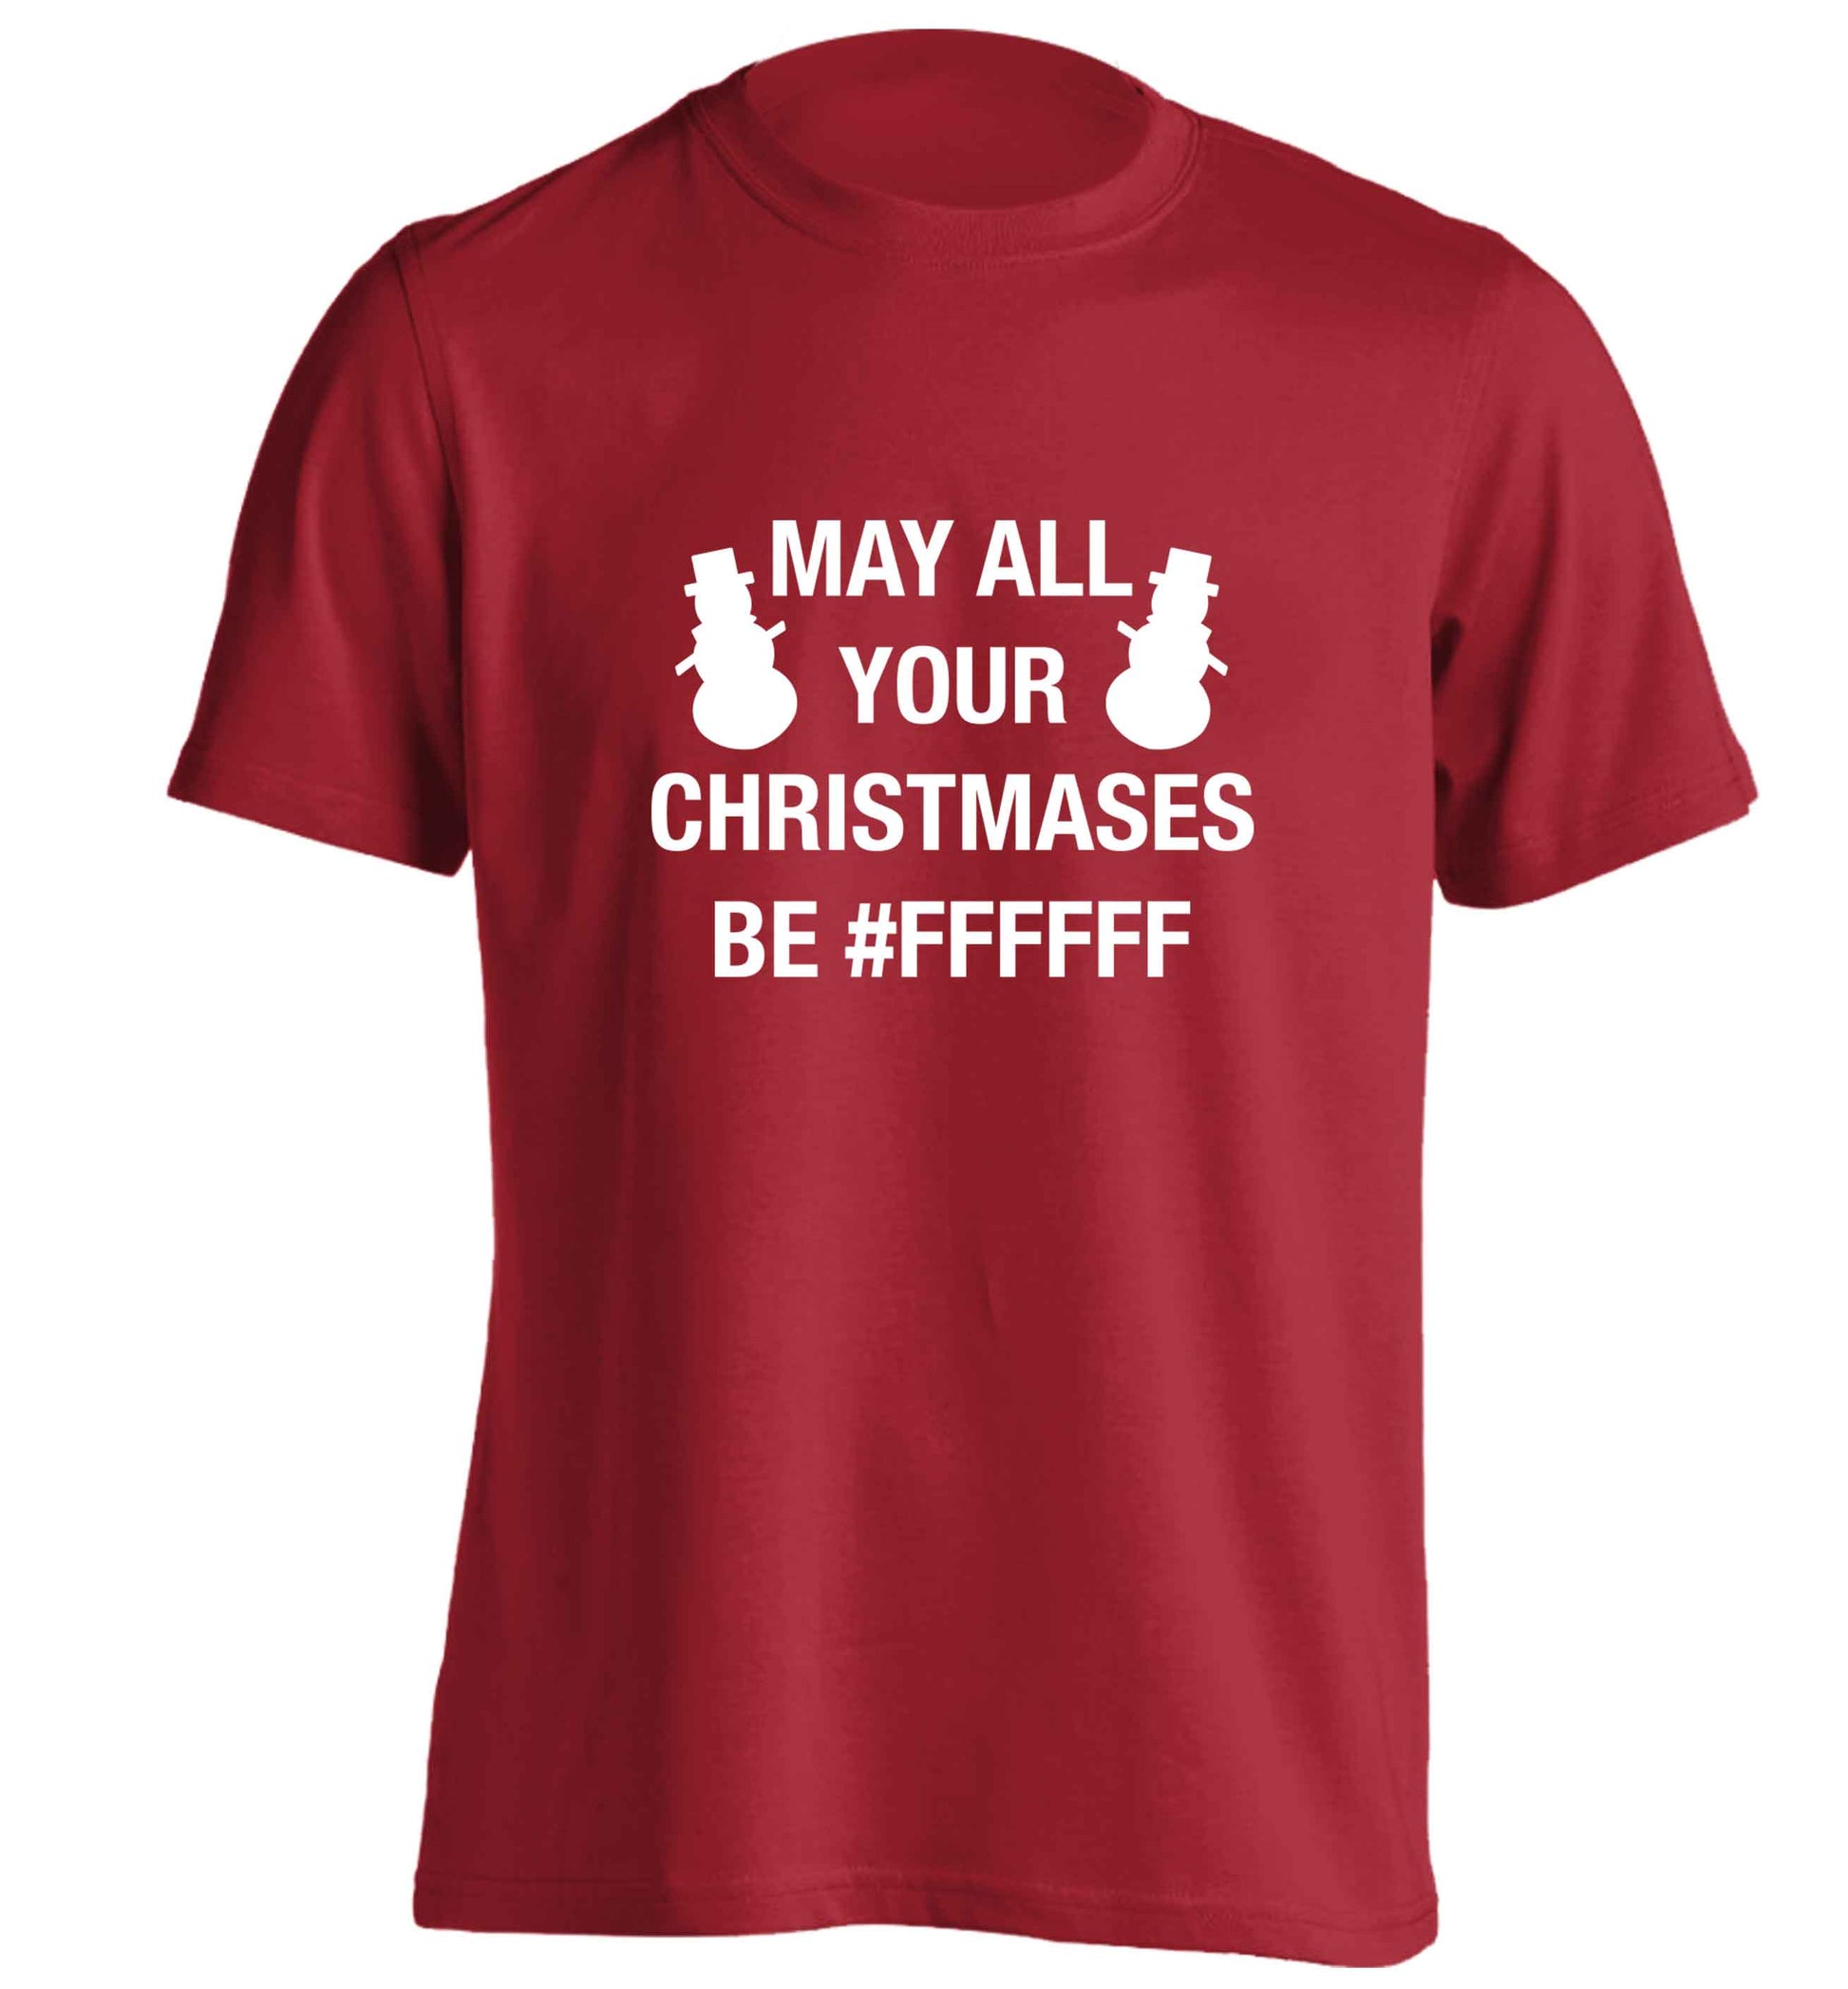 May all your Christmases be #FFFFFF adults unisex red Tshirt 2XL